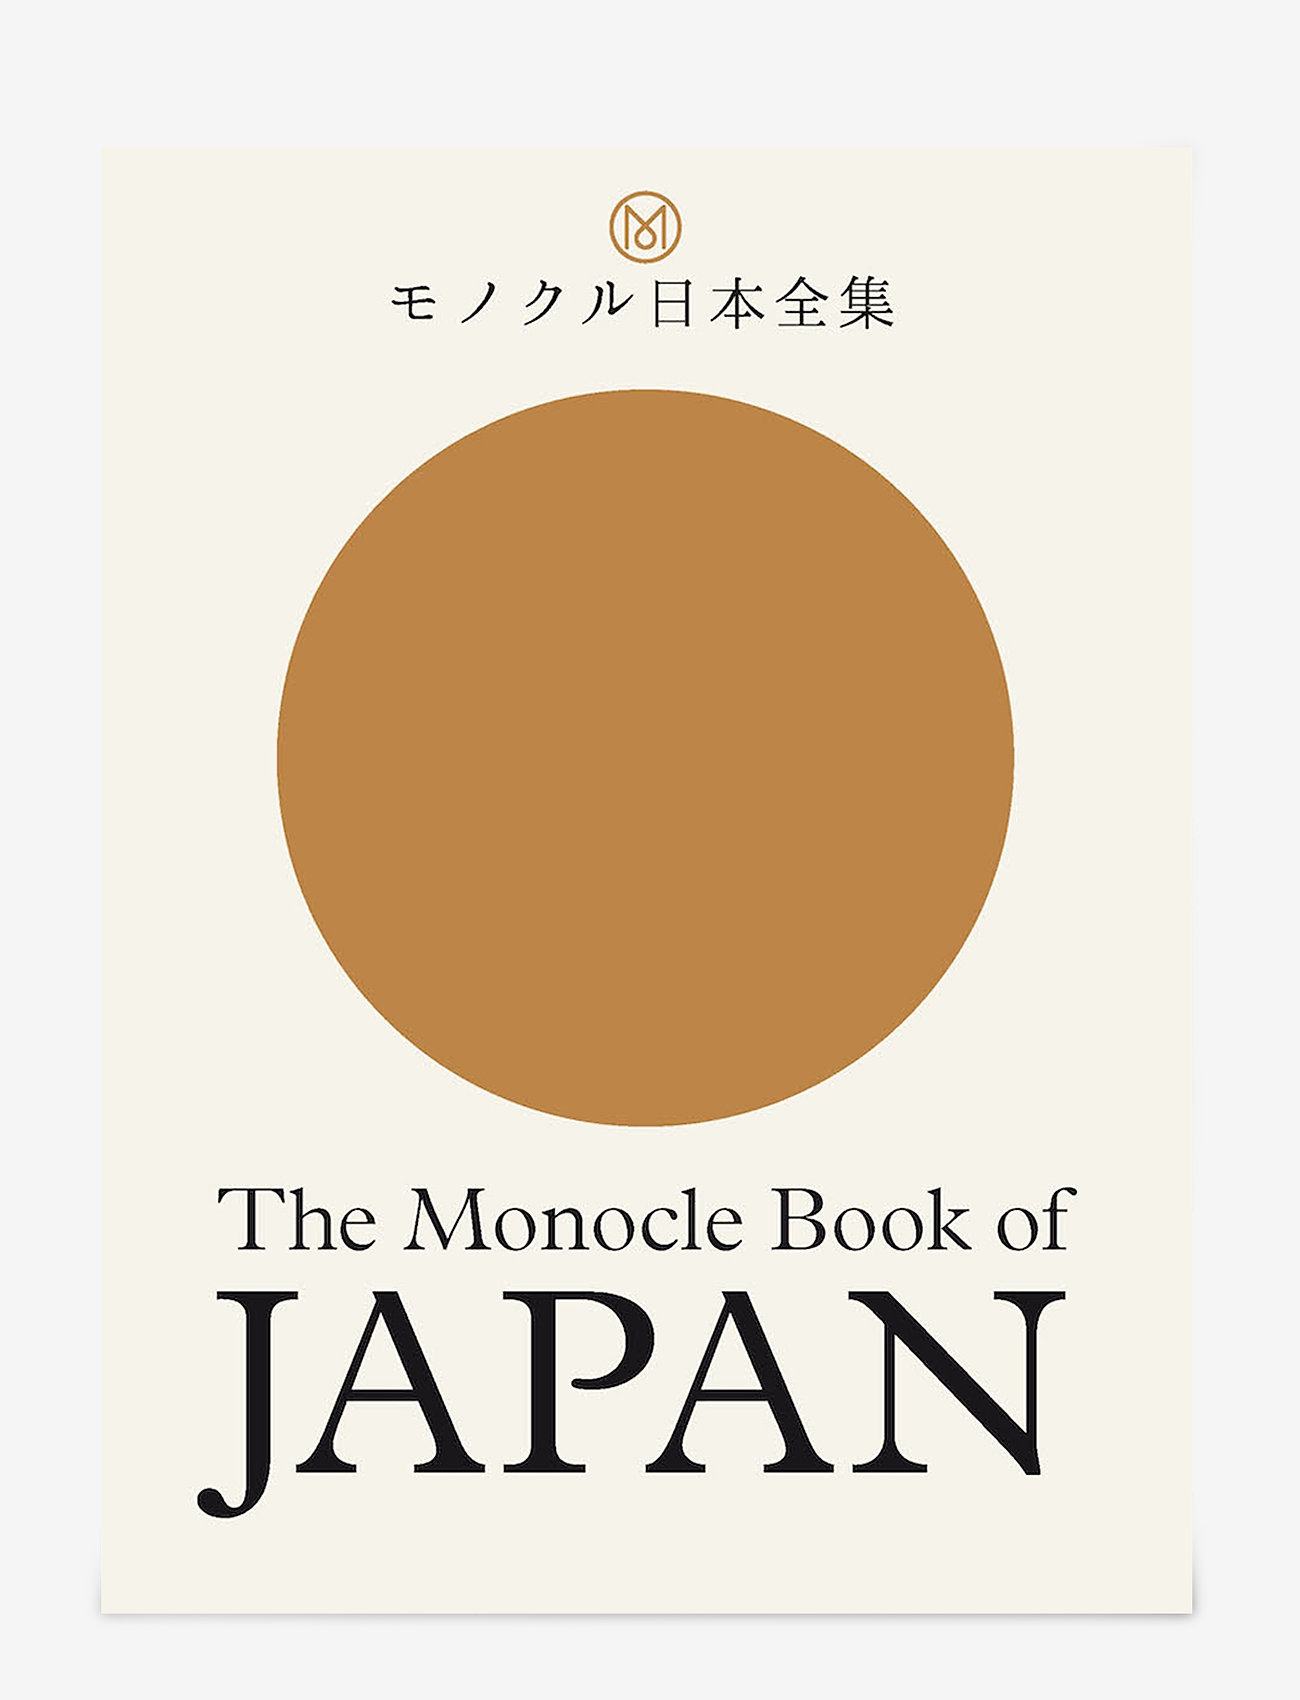 New Mags - The Monocle Book of Japan - geburtstagsgeschenke - gold/sand - 0